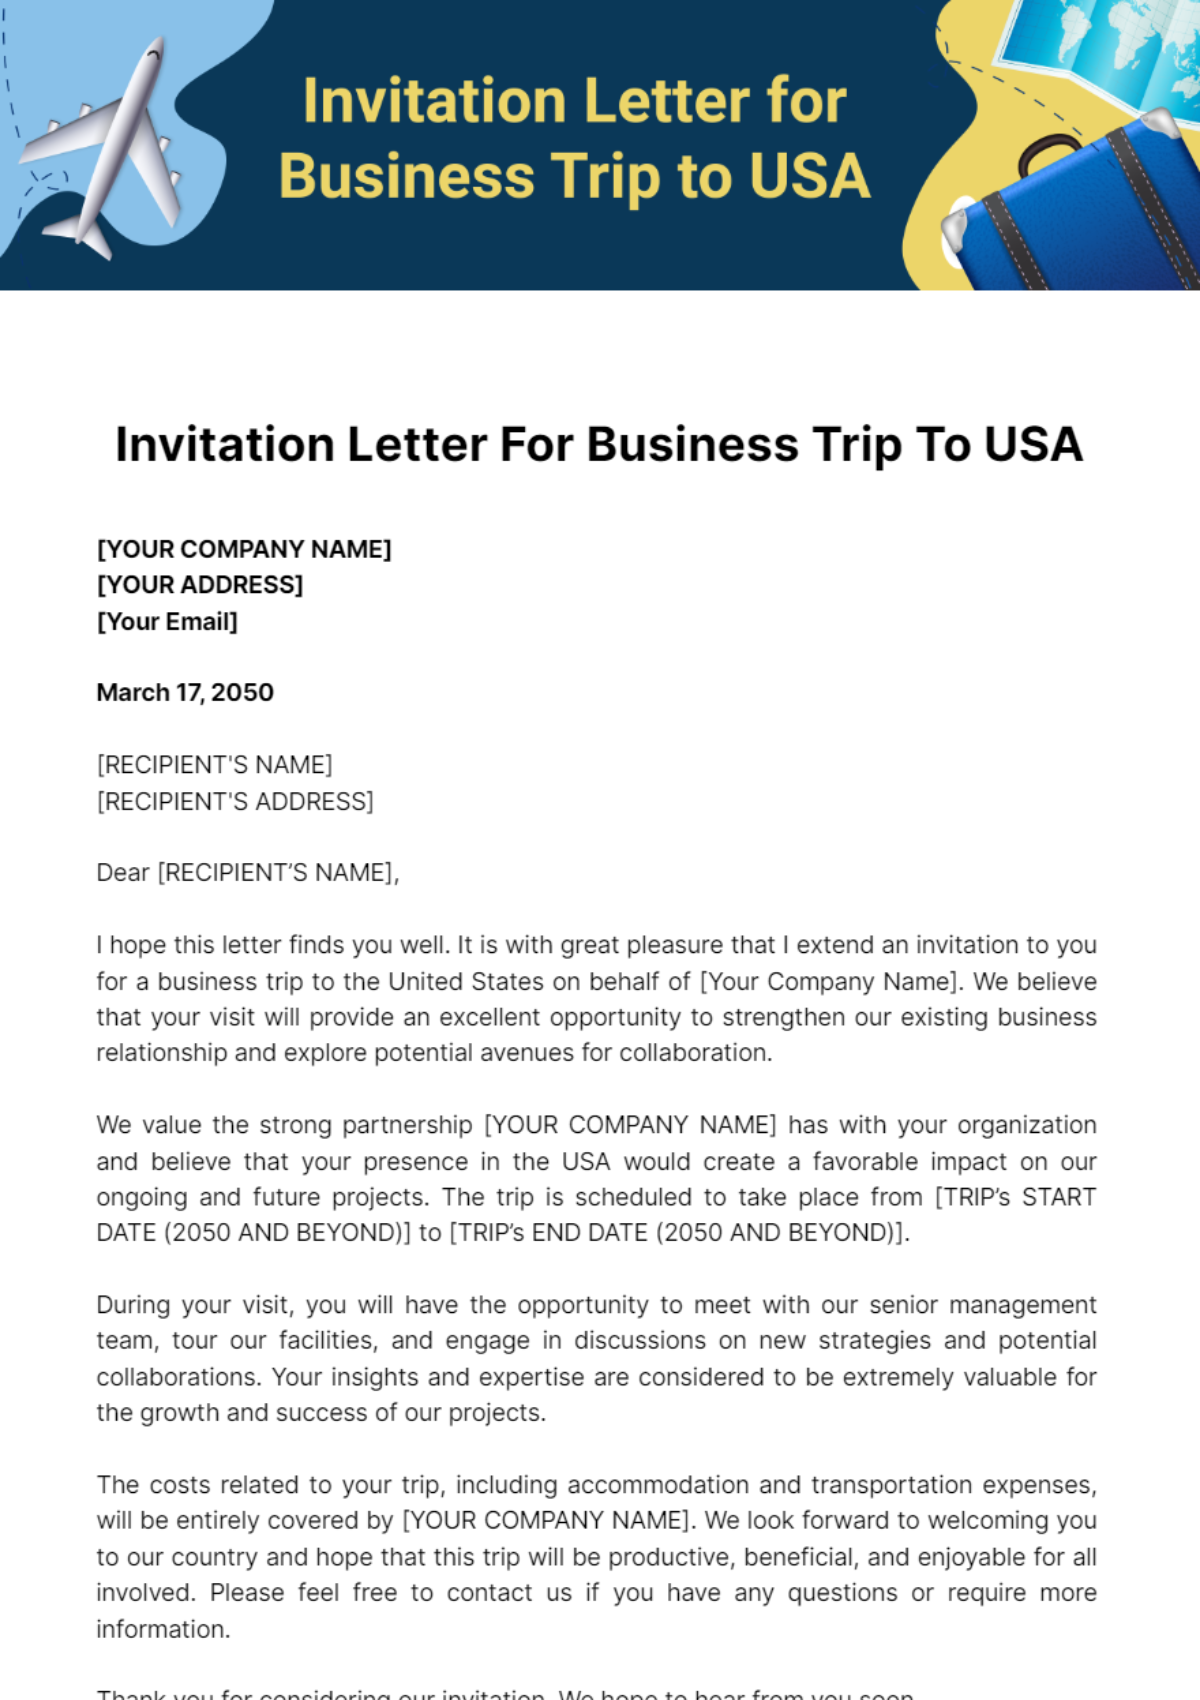 Invitation Letter for Business Trip to USA Template